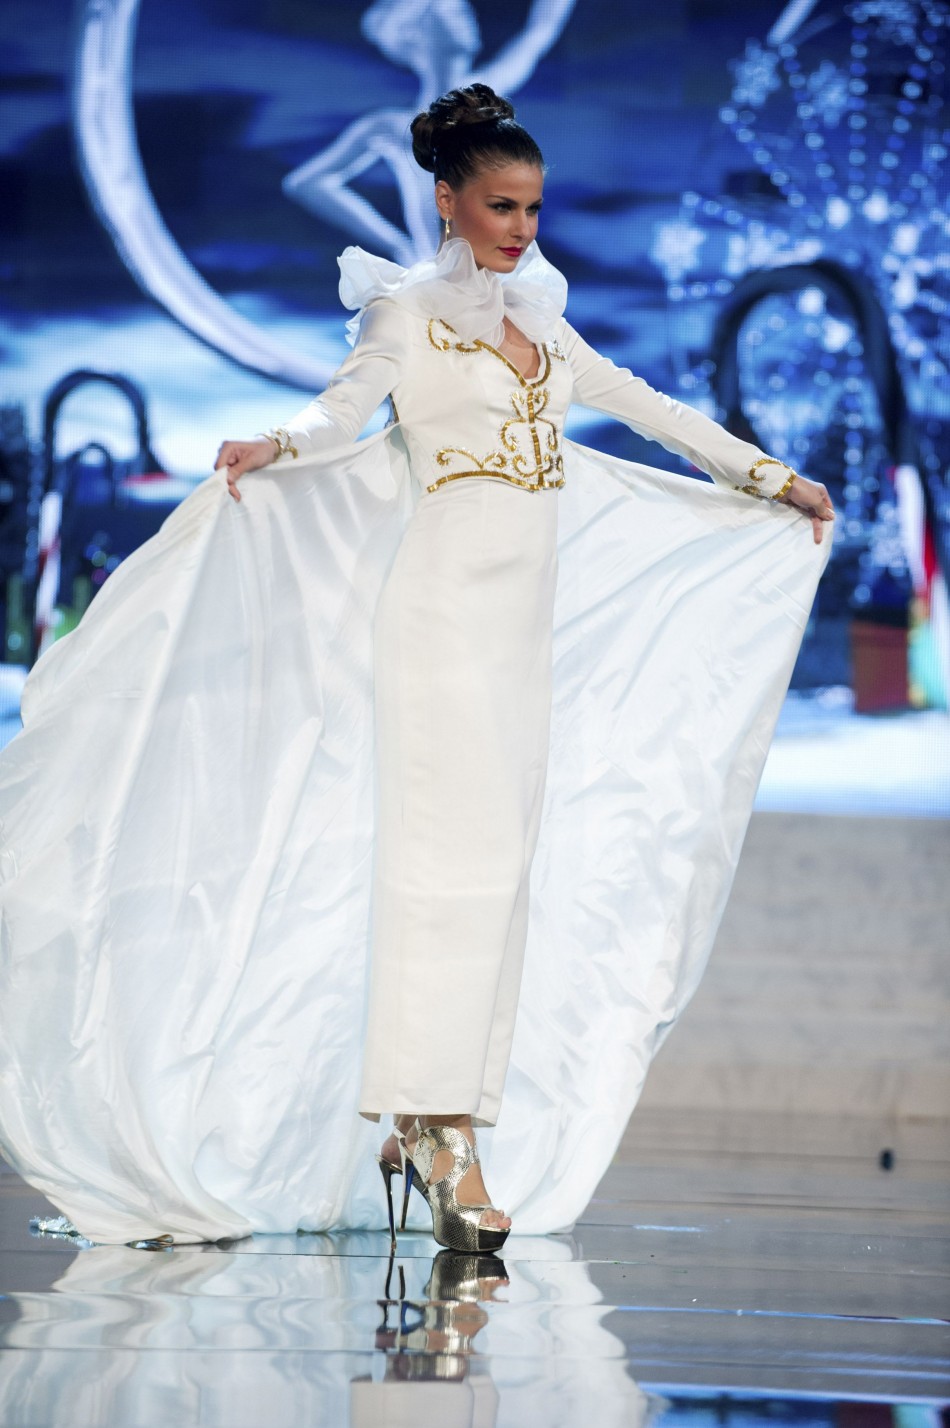 Miss Greece Vasiliki Tsirogianni on stage at the 2012 Miss Universe National Costume Show at PH Live in Las Vegas